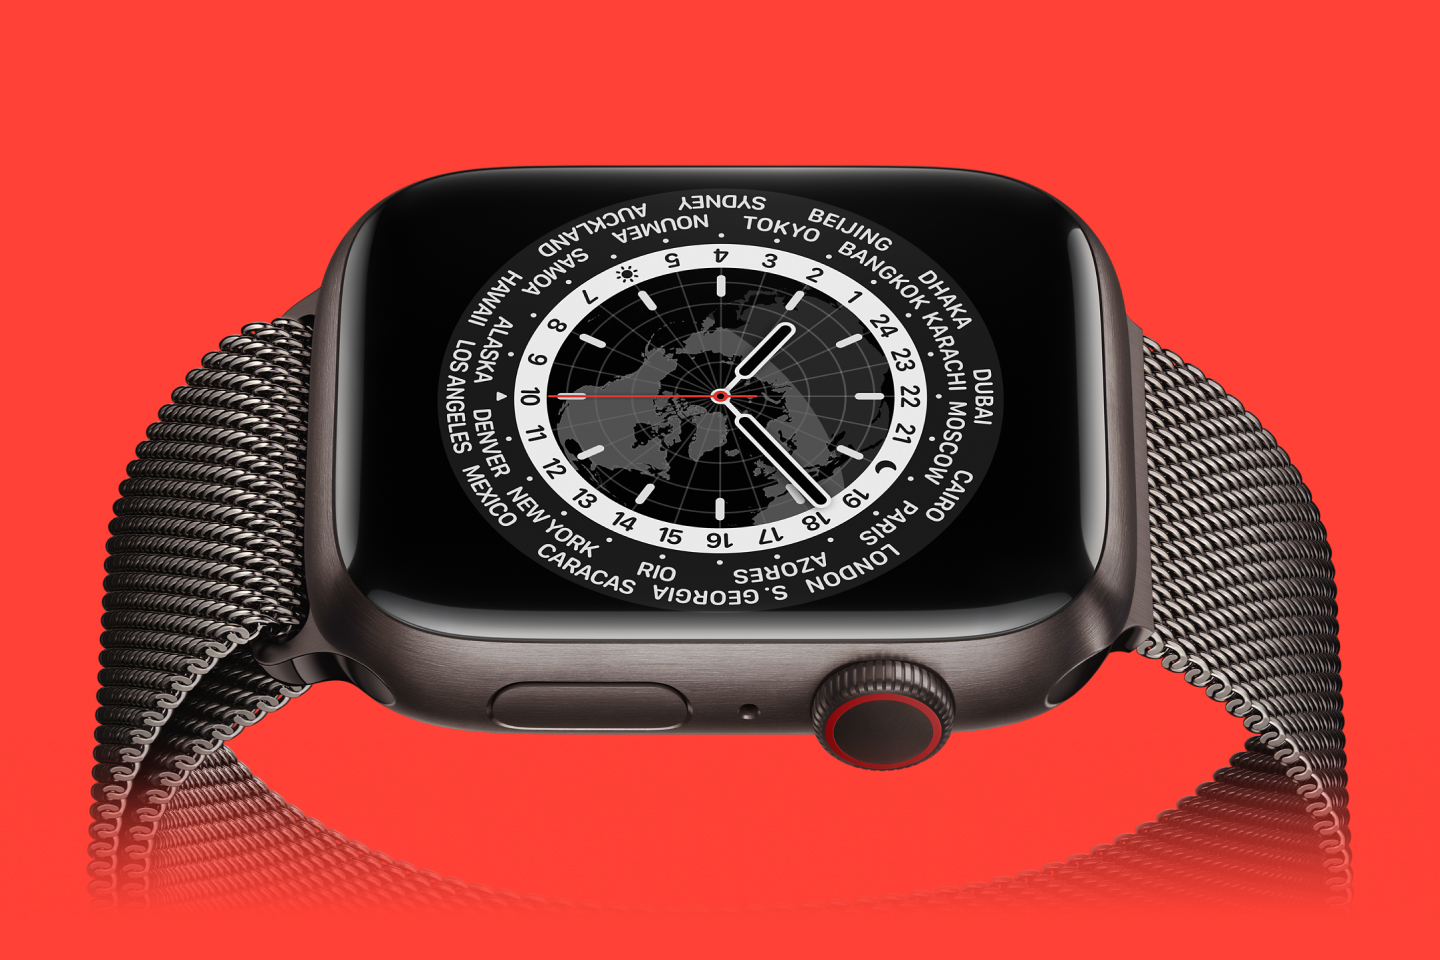 The history behind the World Time face for Apple Watch